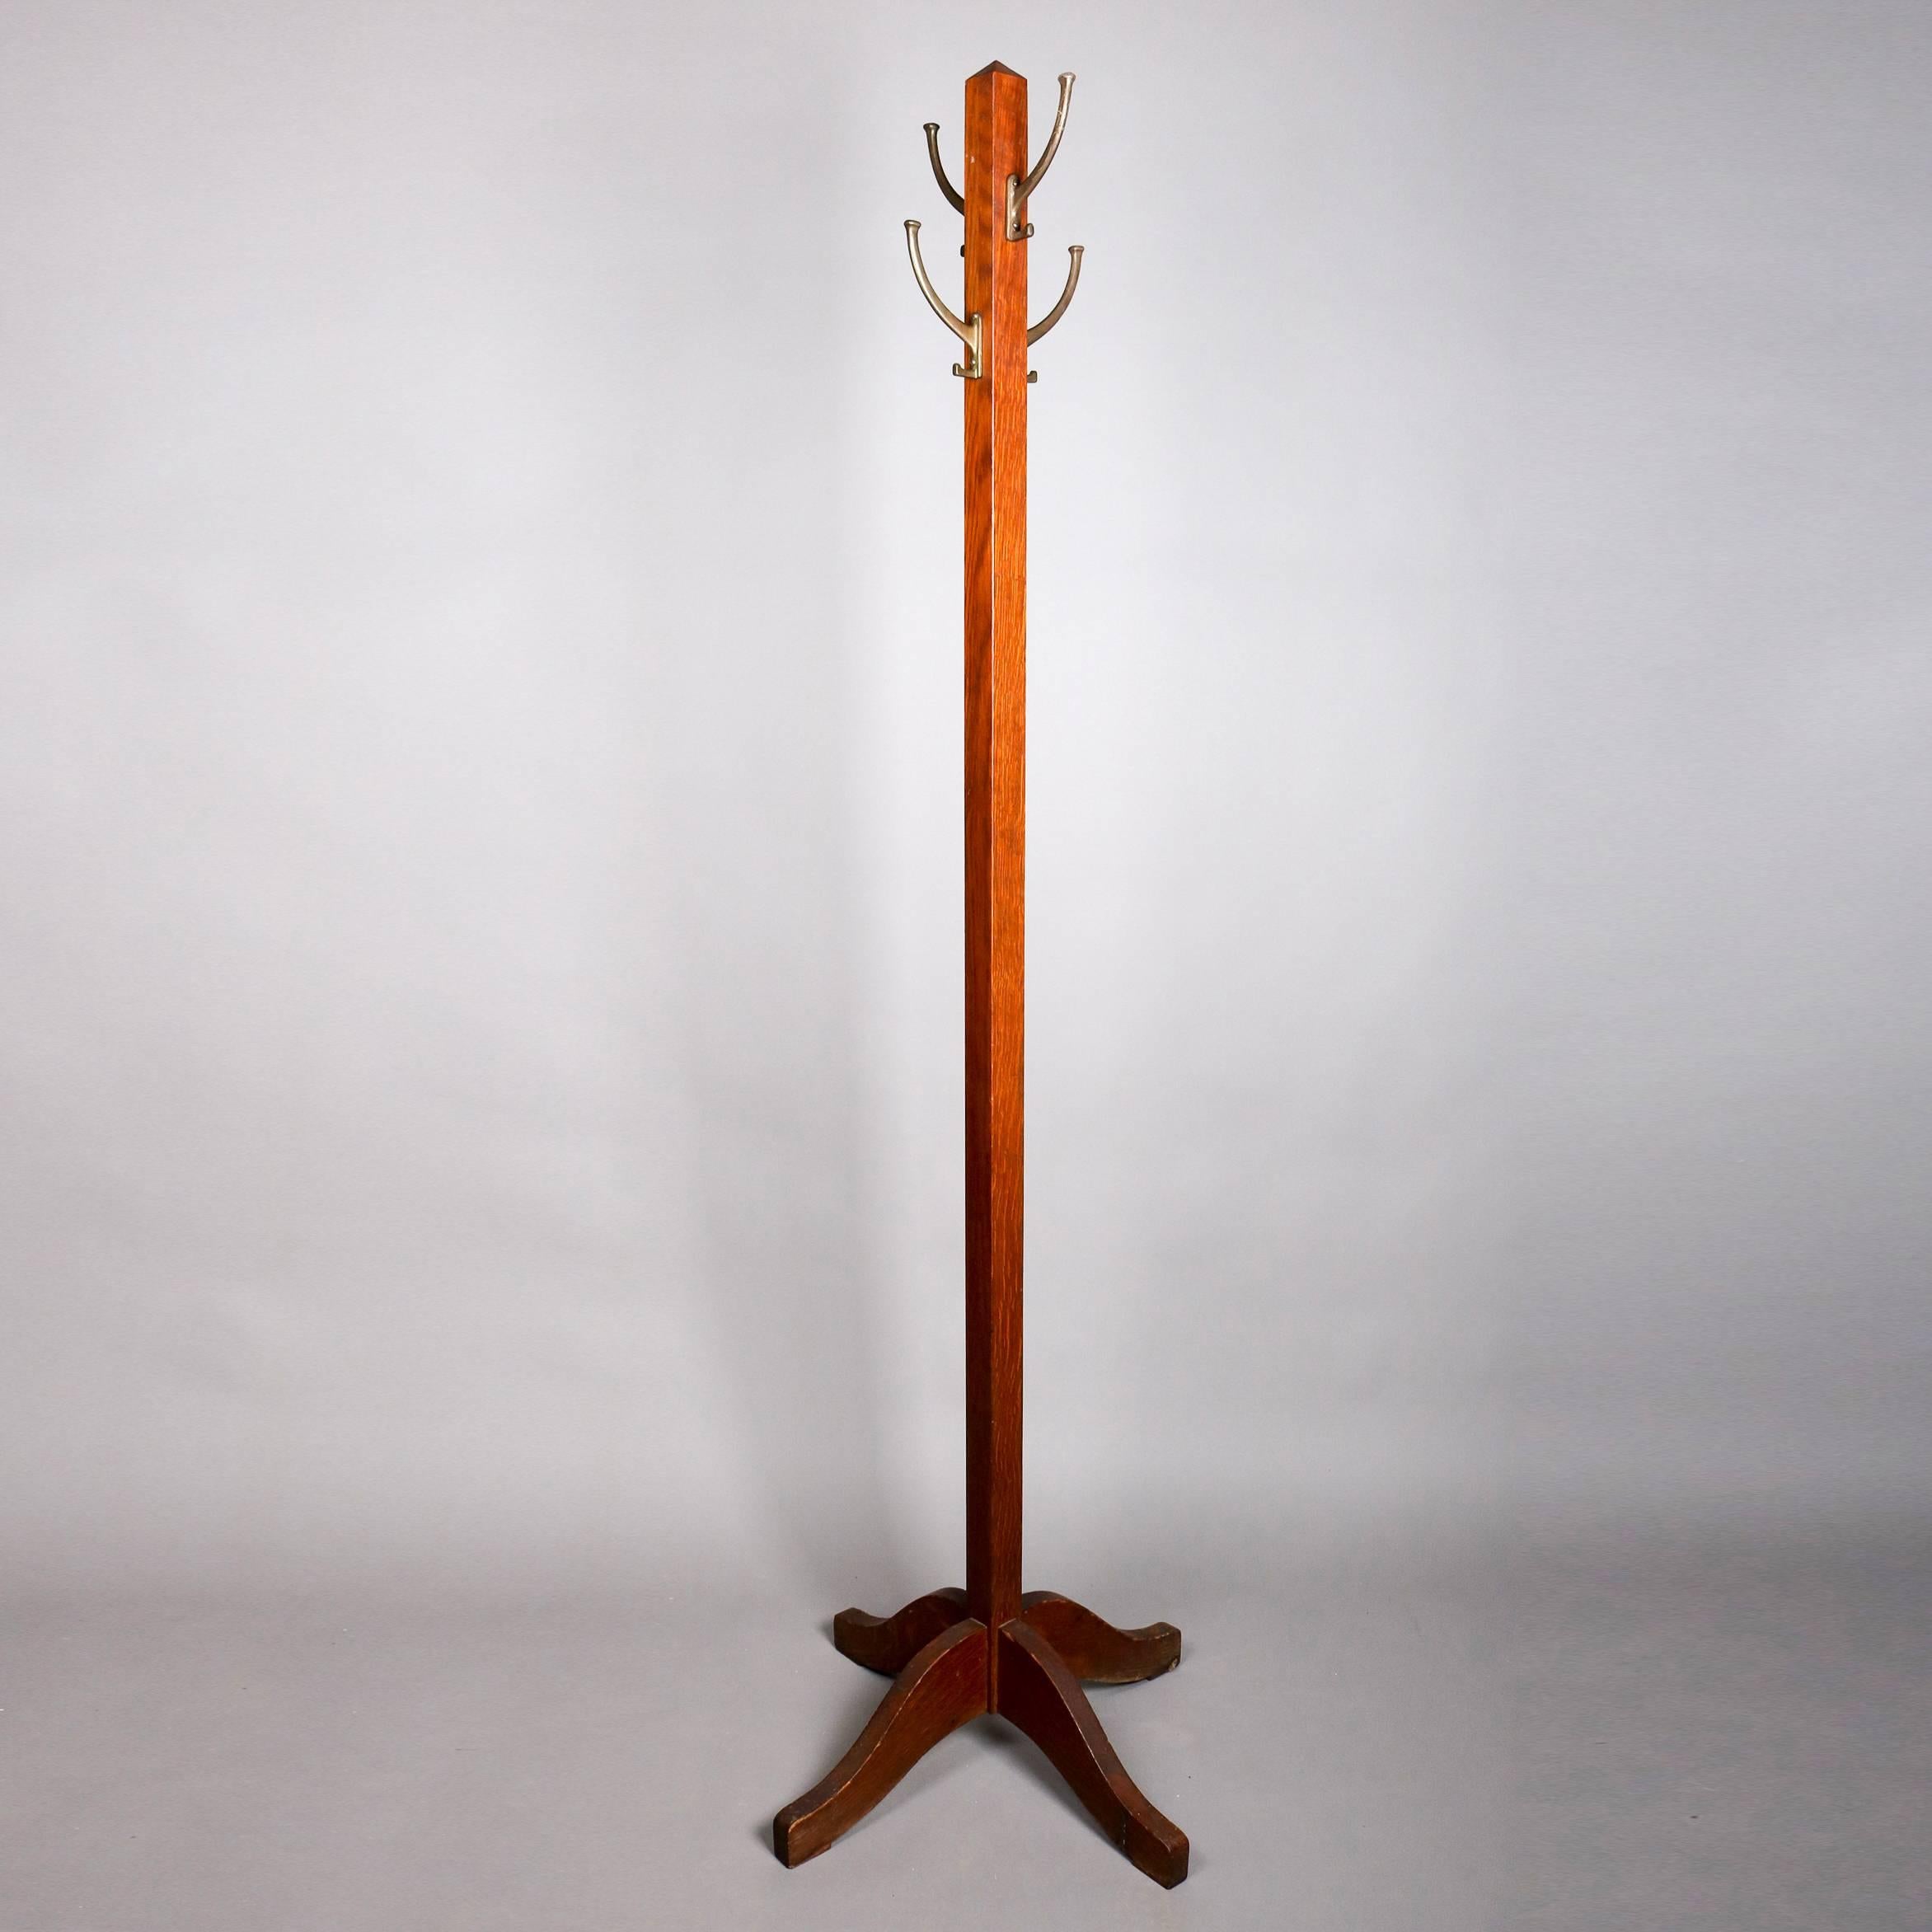 Arts and Crafts Antique Arts & Crafts Mission Oak Hall Tree Coat Rack, Early 20th Century